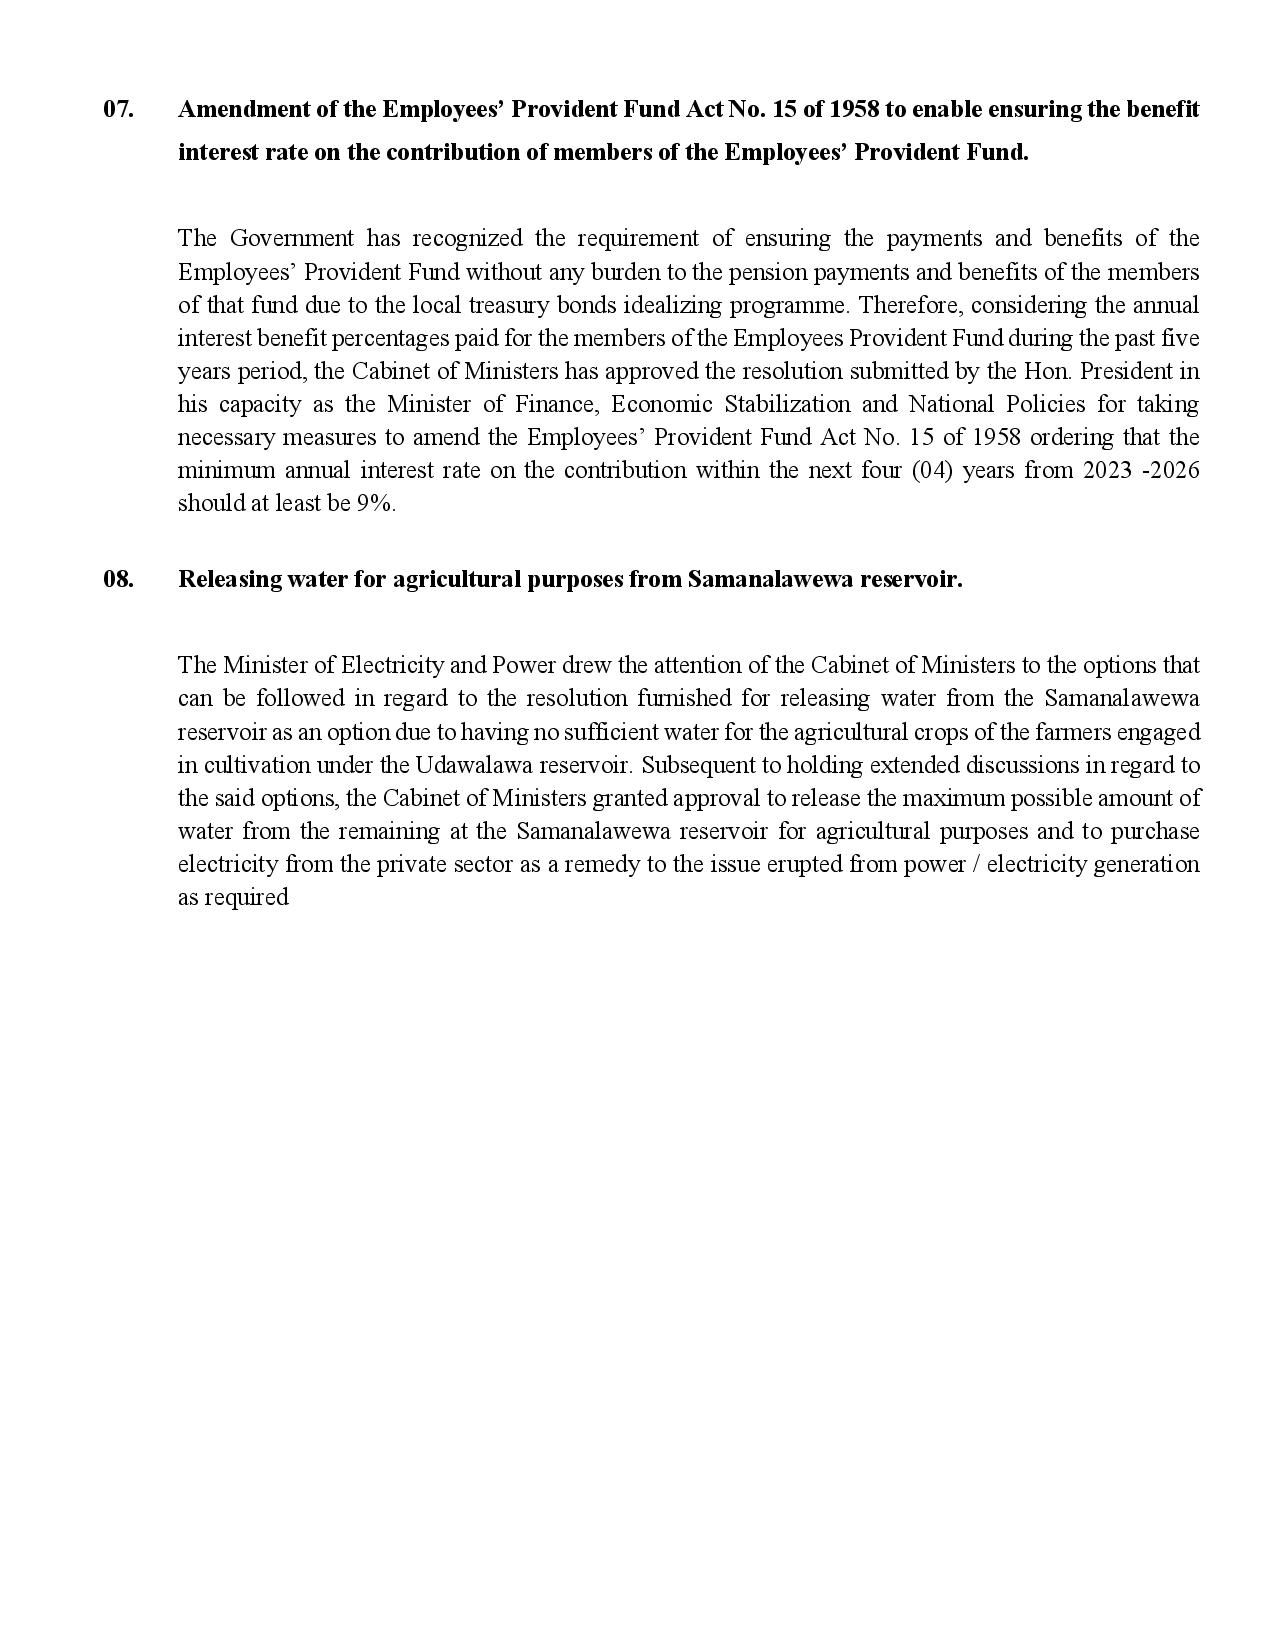 Cabinet Decision on 07.08.2023 English page 003